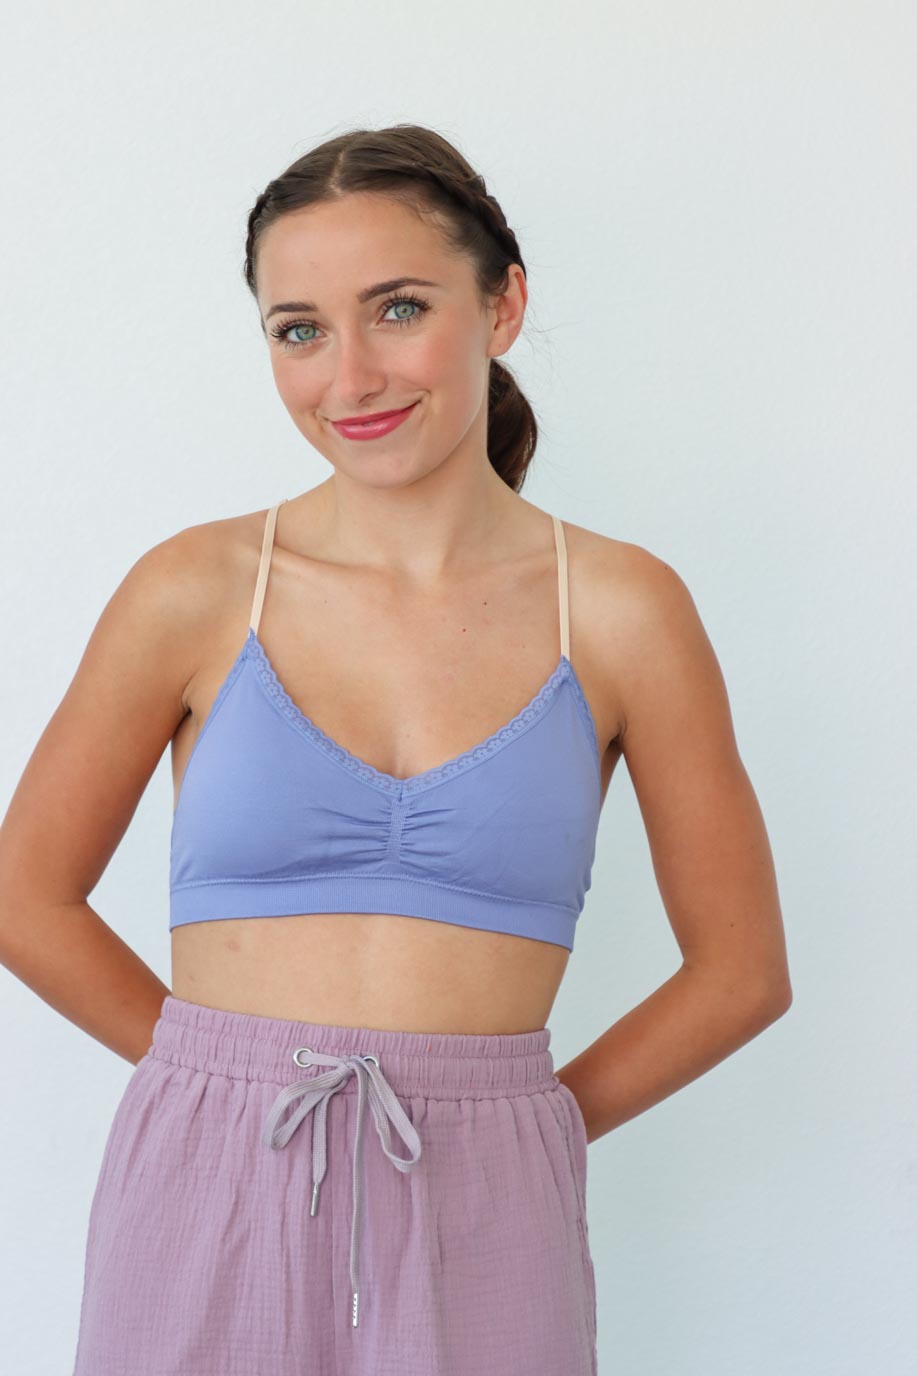 girl wearing lavender bralette top with floral lace back detailing